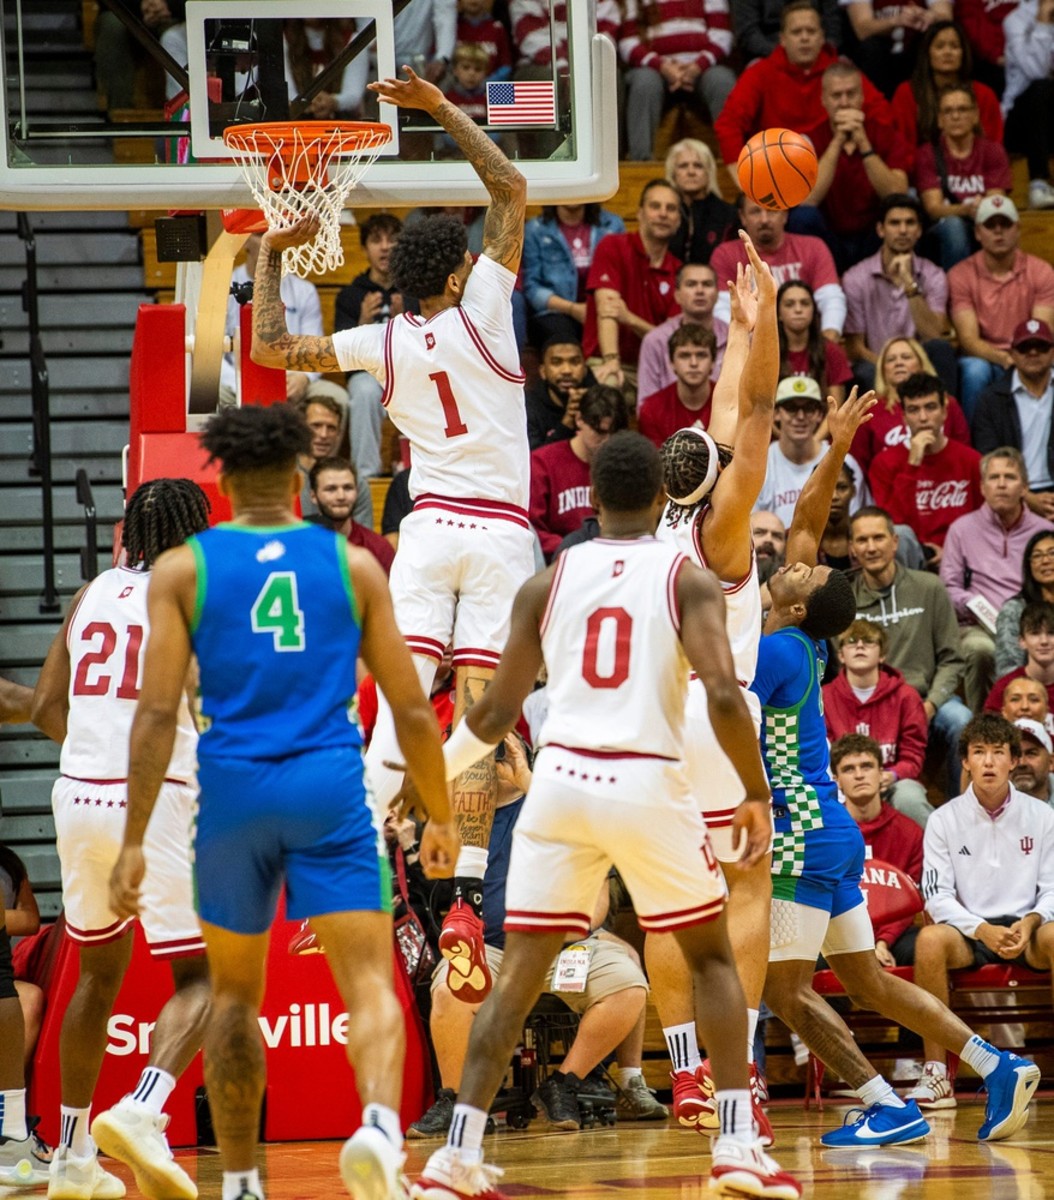 Indiana's Kel'el Ware (1) goes up to block a shot during the first half of the Indiana versus Florida Gulf Coast men's basketball game at Simon Skjodt Assembly Hall.